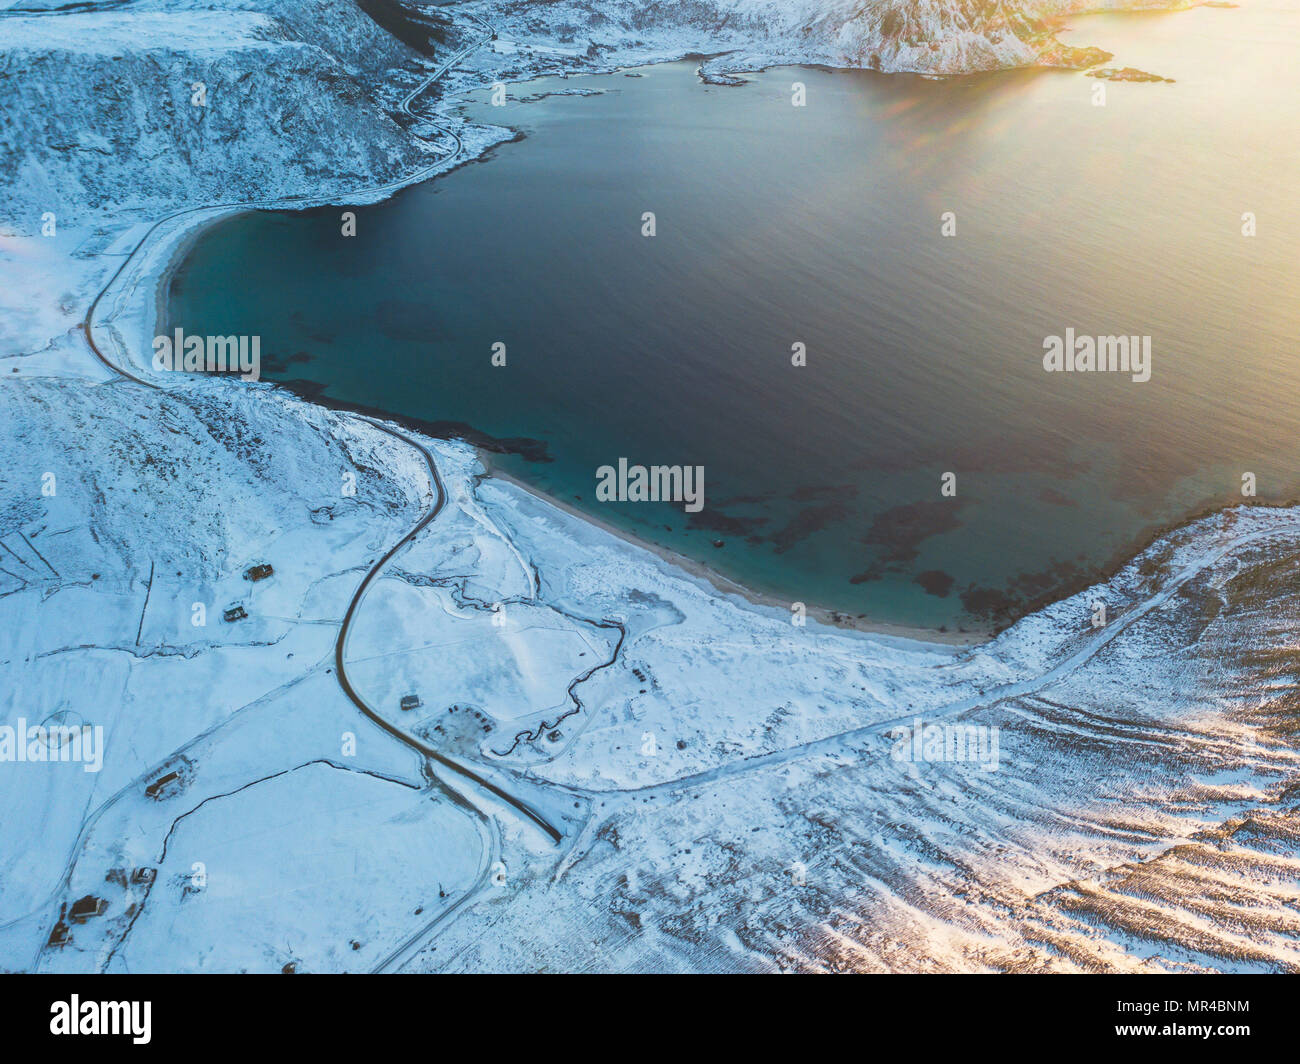 Aerial winter view of Lofoten Islands beach, Norway, shot from drone Stock Photo